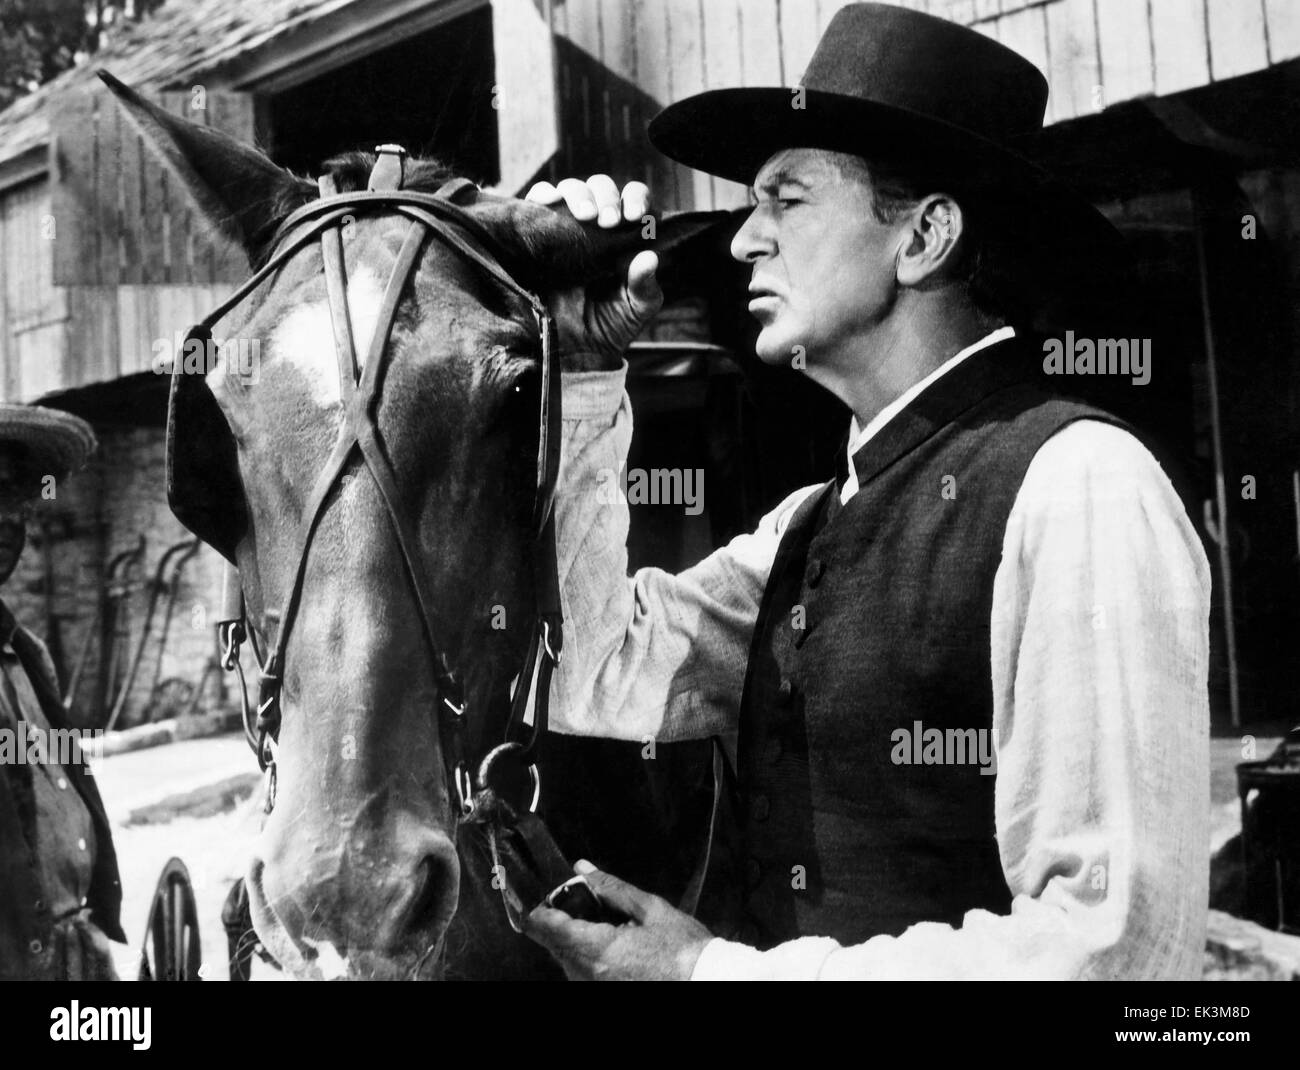 Gary Cooper, on-set of the Film 'Friendly Persuasion', 1956 Stock Photo